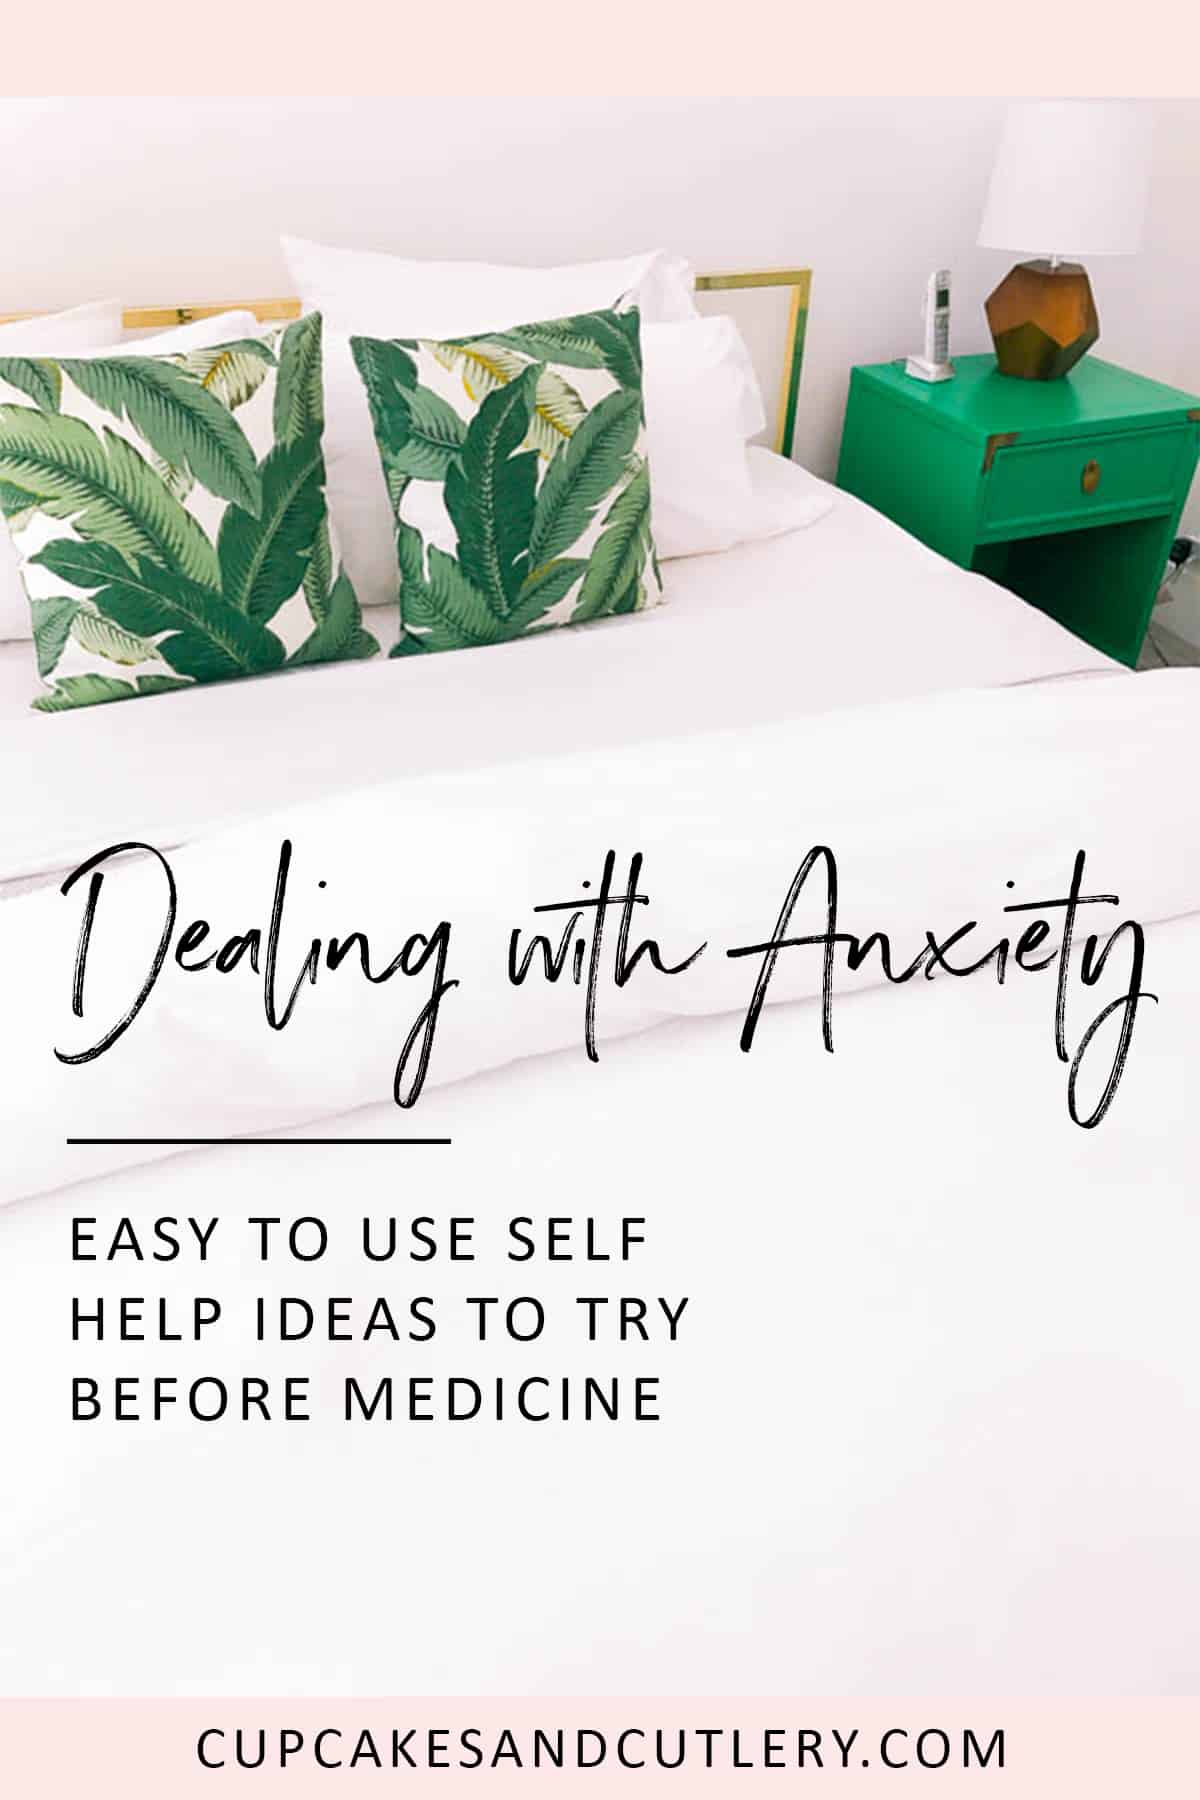 Looking for anxiety relief techniques and tips? Try these easy DIY remedies like remembering to breathe through the stress. #selfhelp #anxiety #cupcakesandcutlery #mentalhealth #wellness #selfcare